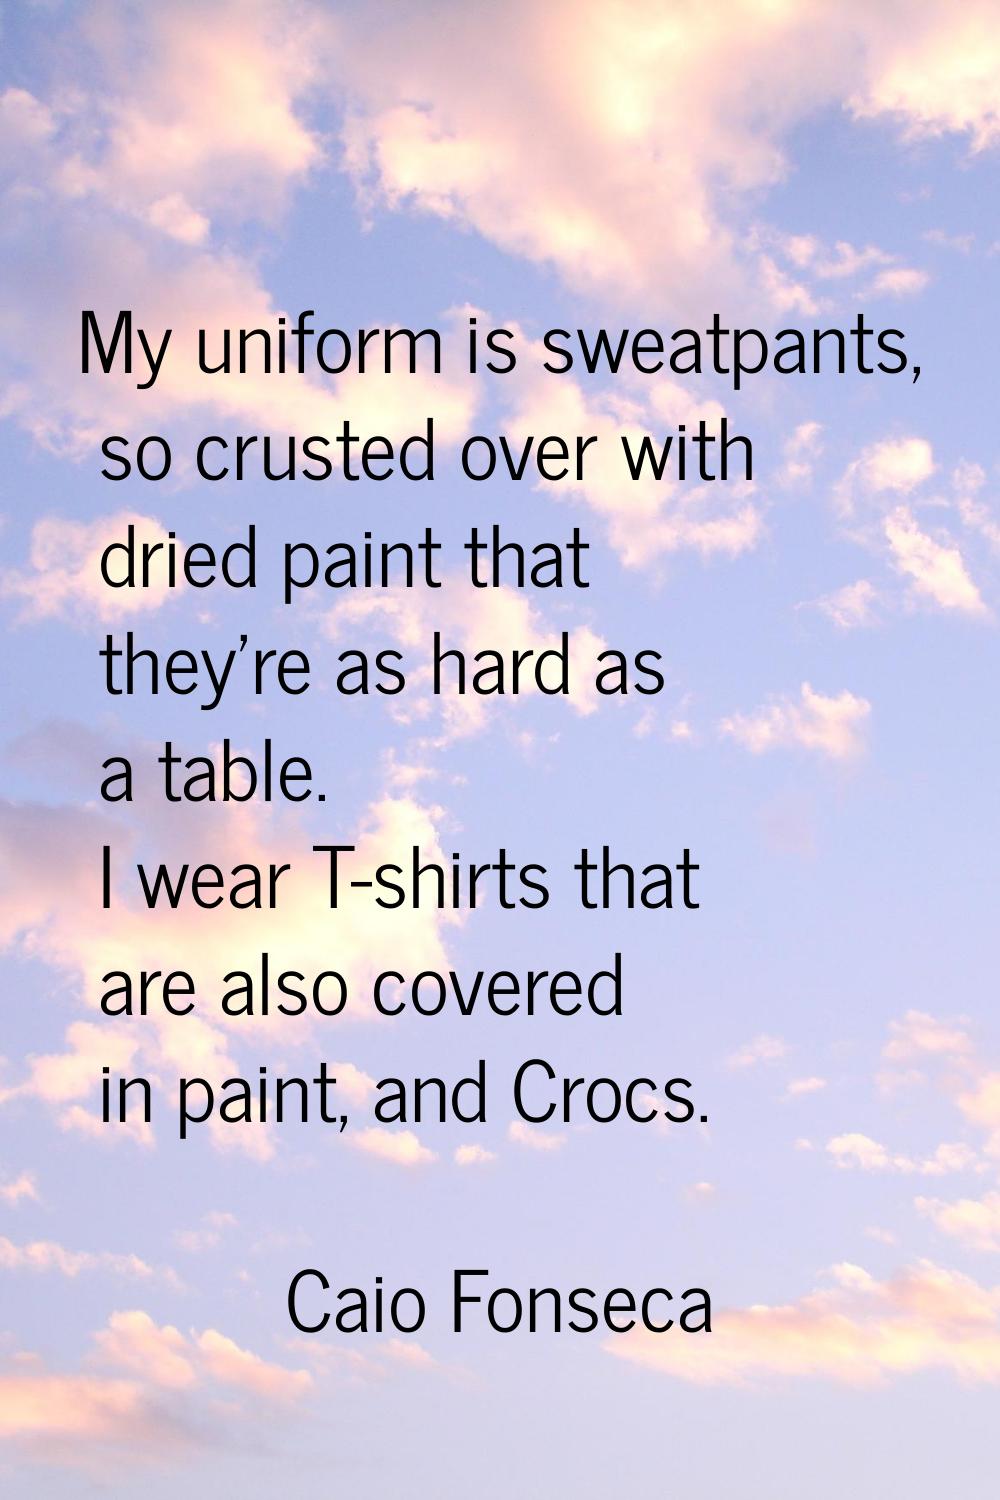 My uniform is sweatpants, so crusted over with dried paint that they're as hard as a table. I wear 